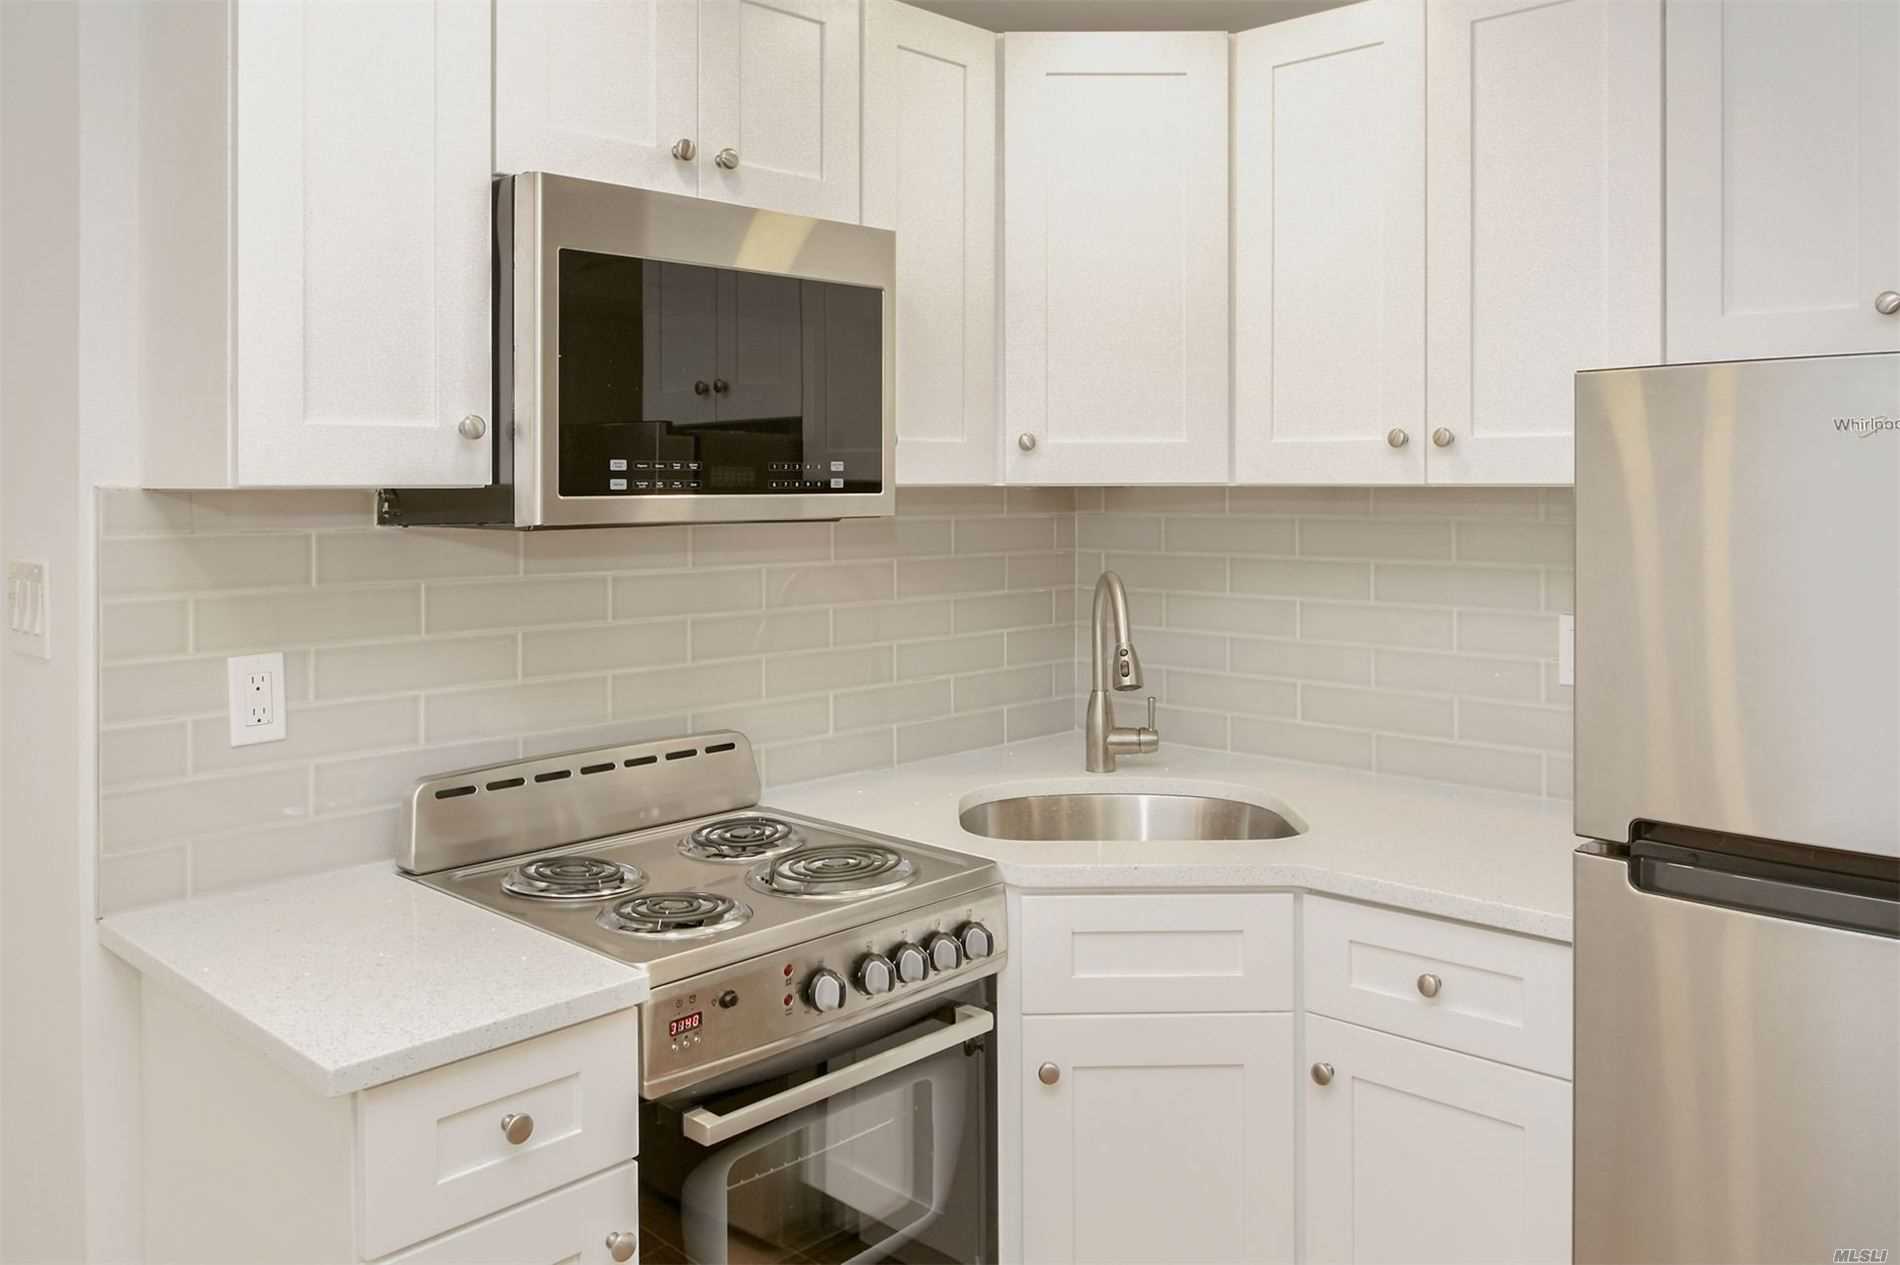 Lovely, sunny studio, beautifully renovated w/new appliances. A rare find in Forest Hills Gardens!